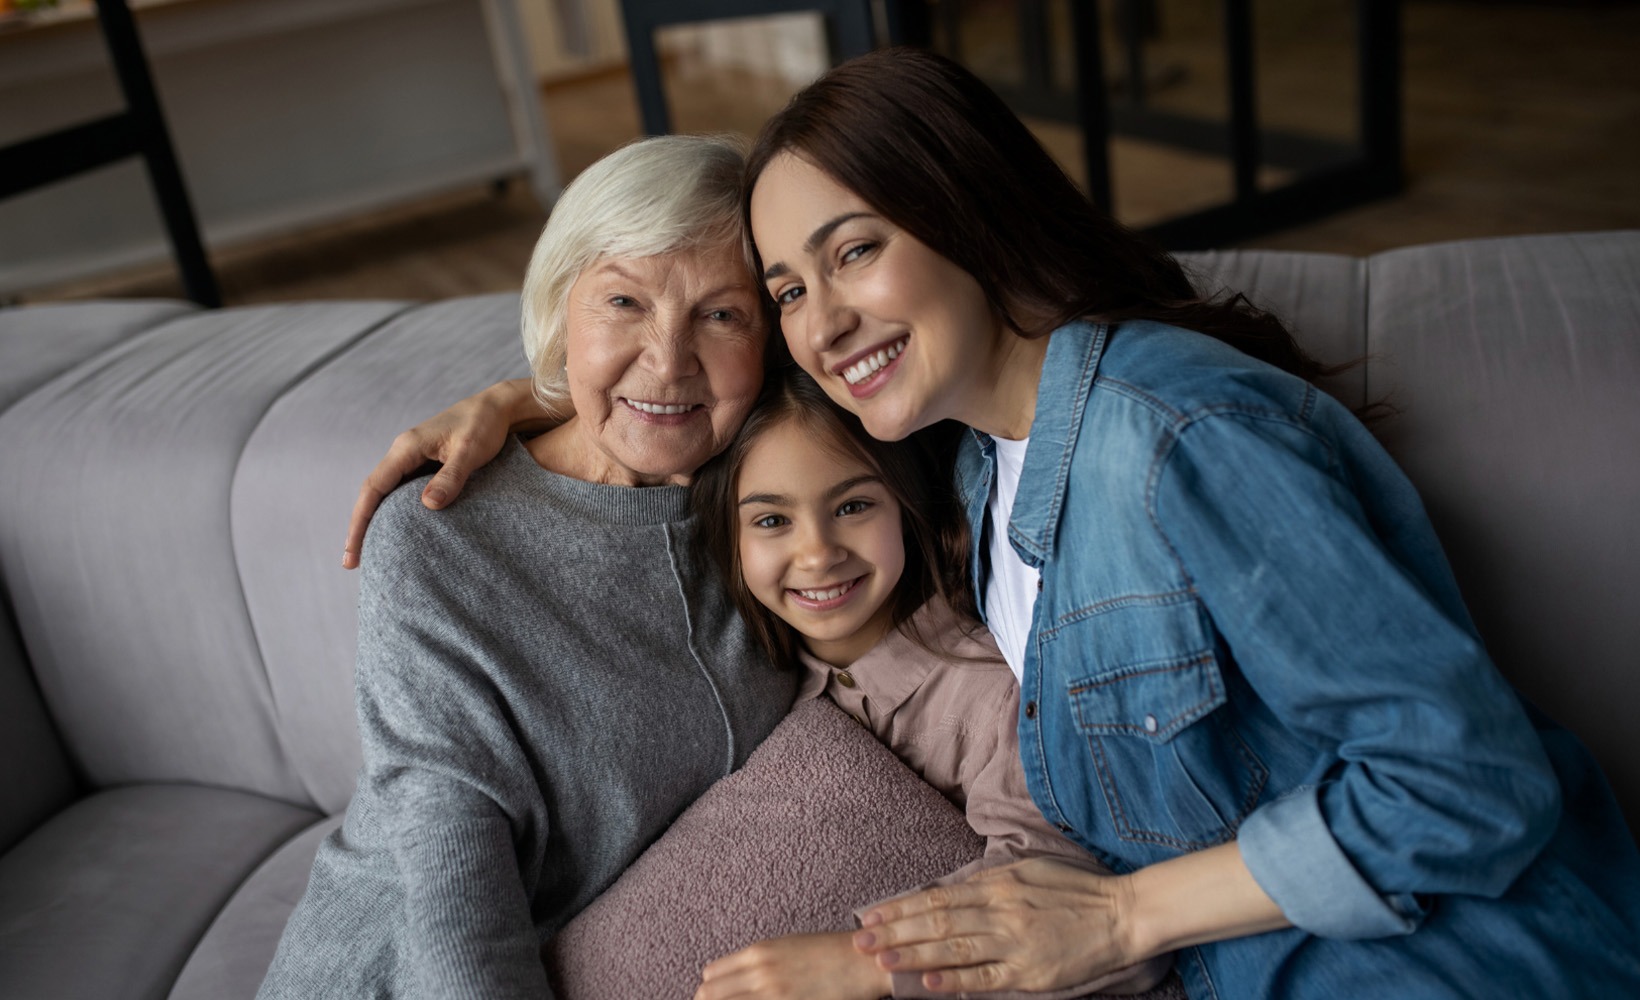 Grandmother, mother and granddaughter posing for picture on couch.